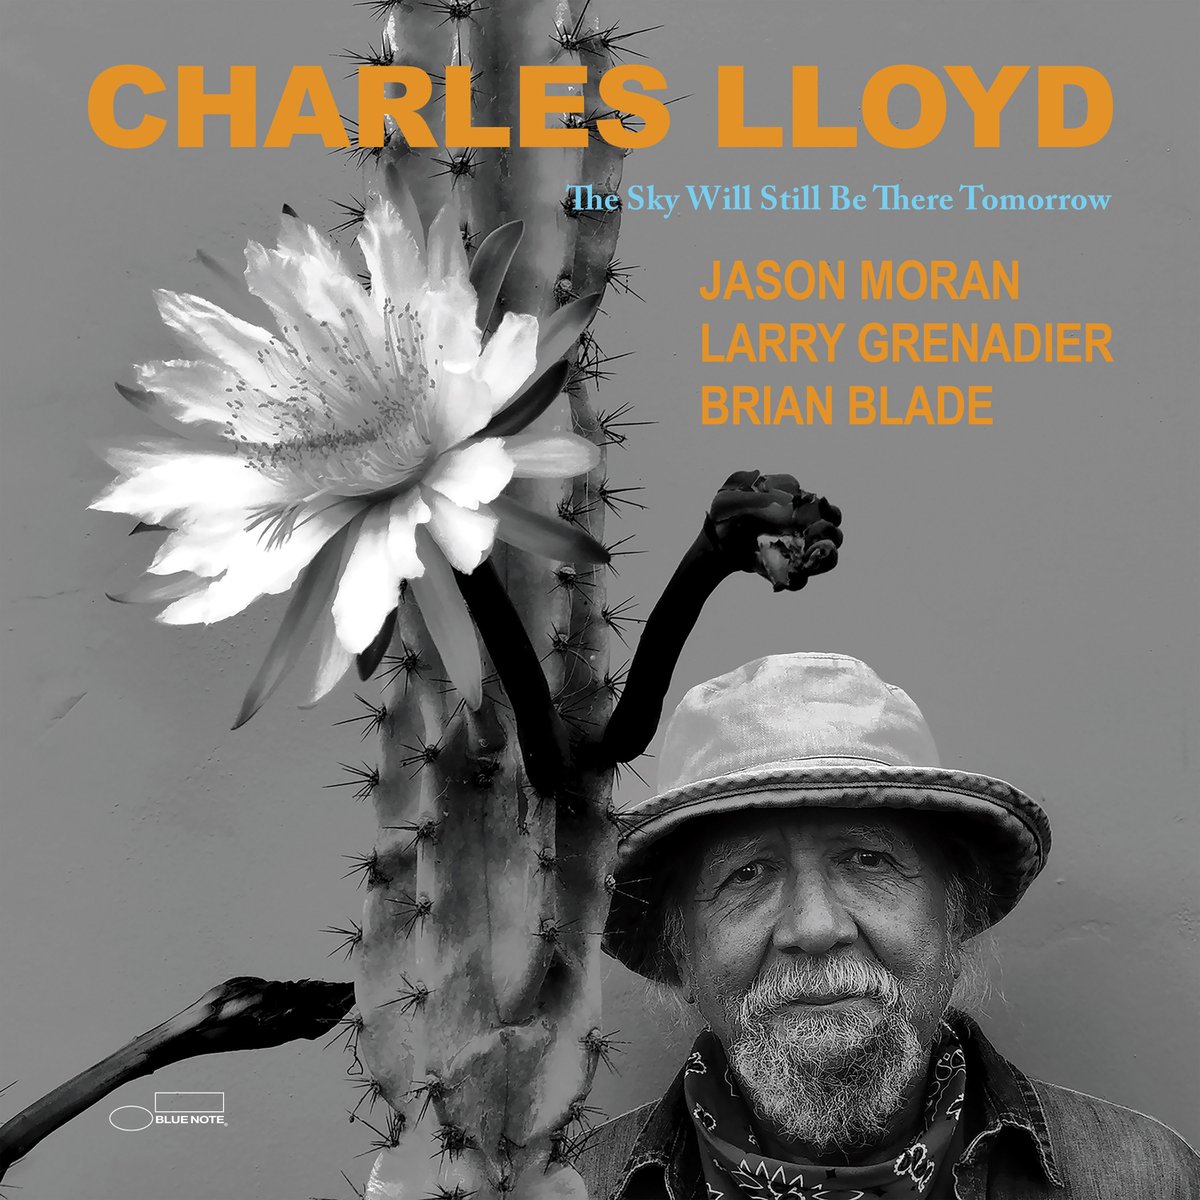 “a significant addition to Lloyd’s era-traversing catalog”—Stereophile ‘Recording of the Month’ PERFORMANCE: ★★★★★ SONICS: ★★★★★ @CharlesLloydSax 'The Sky Will Still Be There Tomorrow' is out now: charleslloyd.lnk.to/TheSkyWillStil…